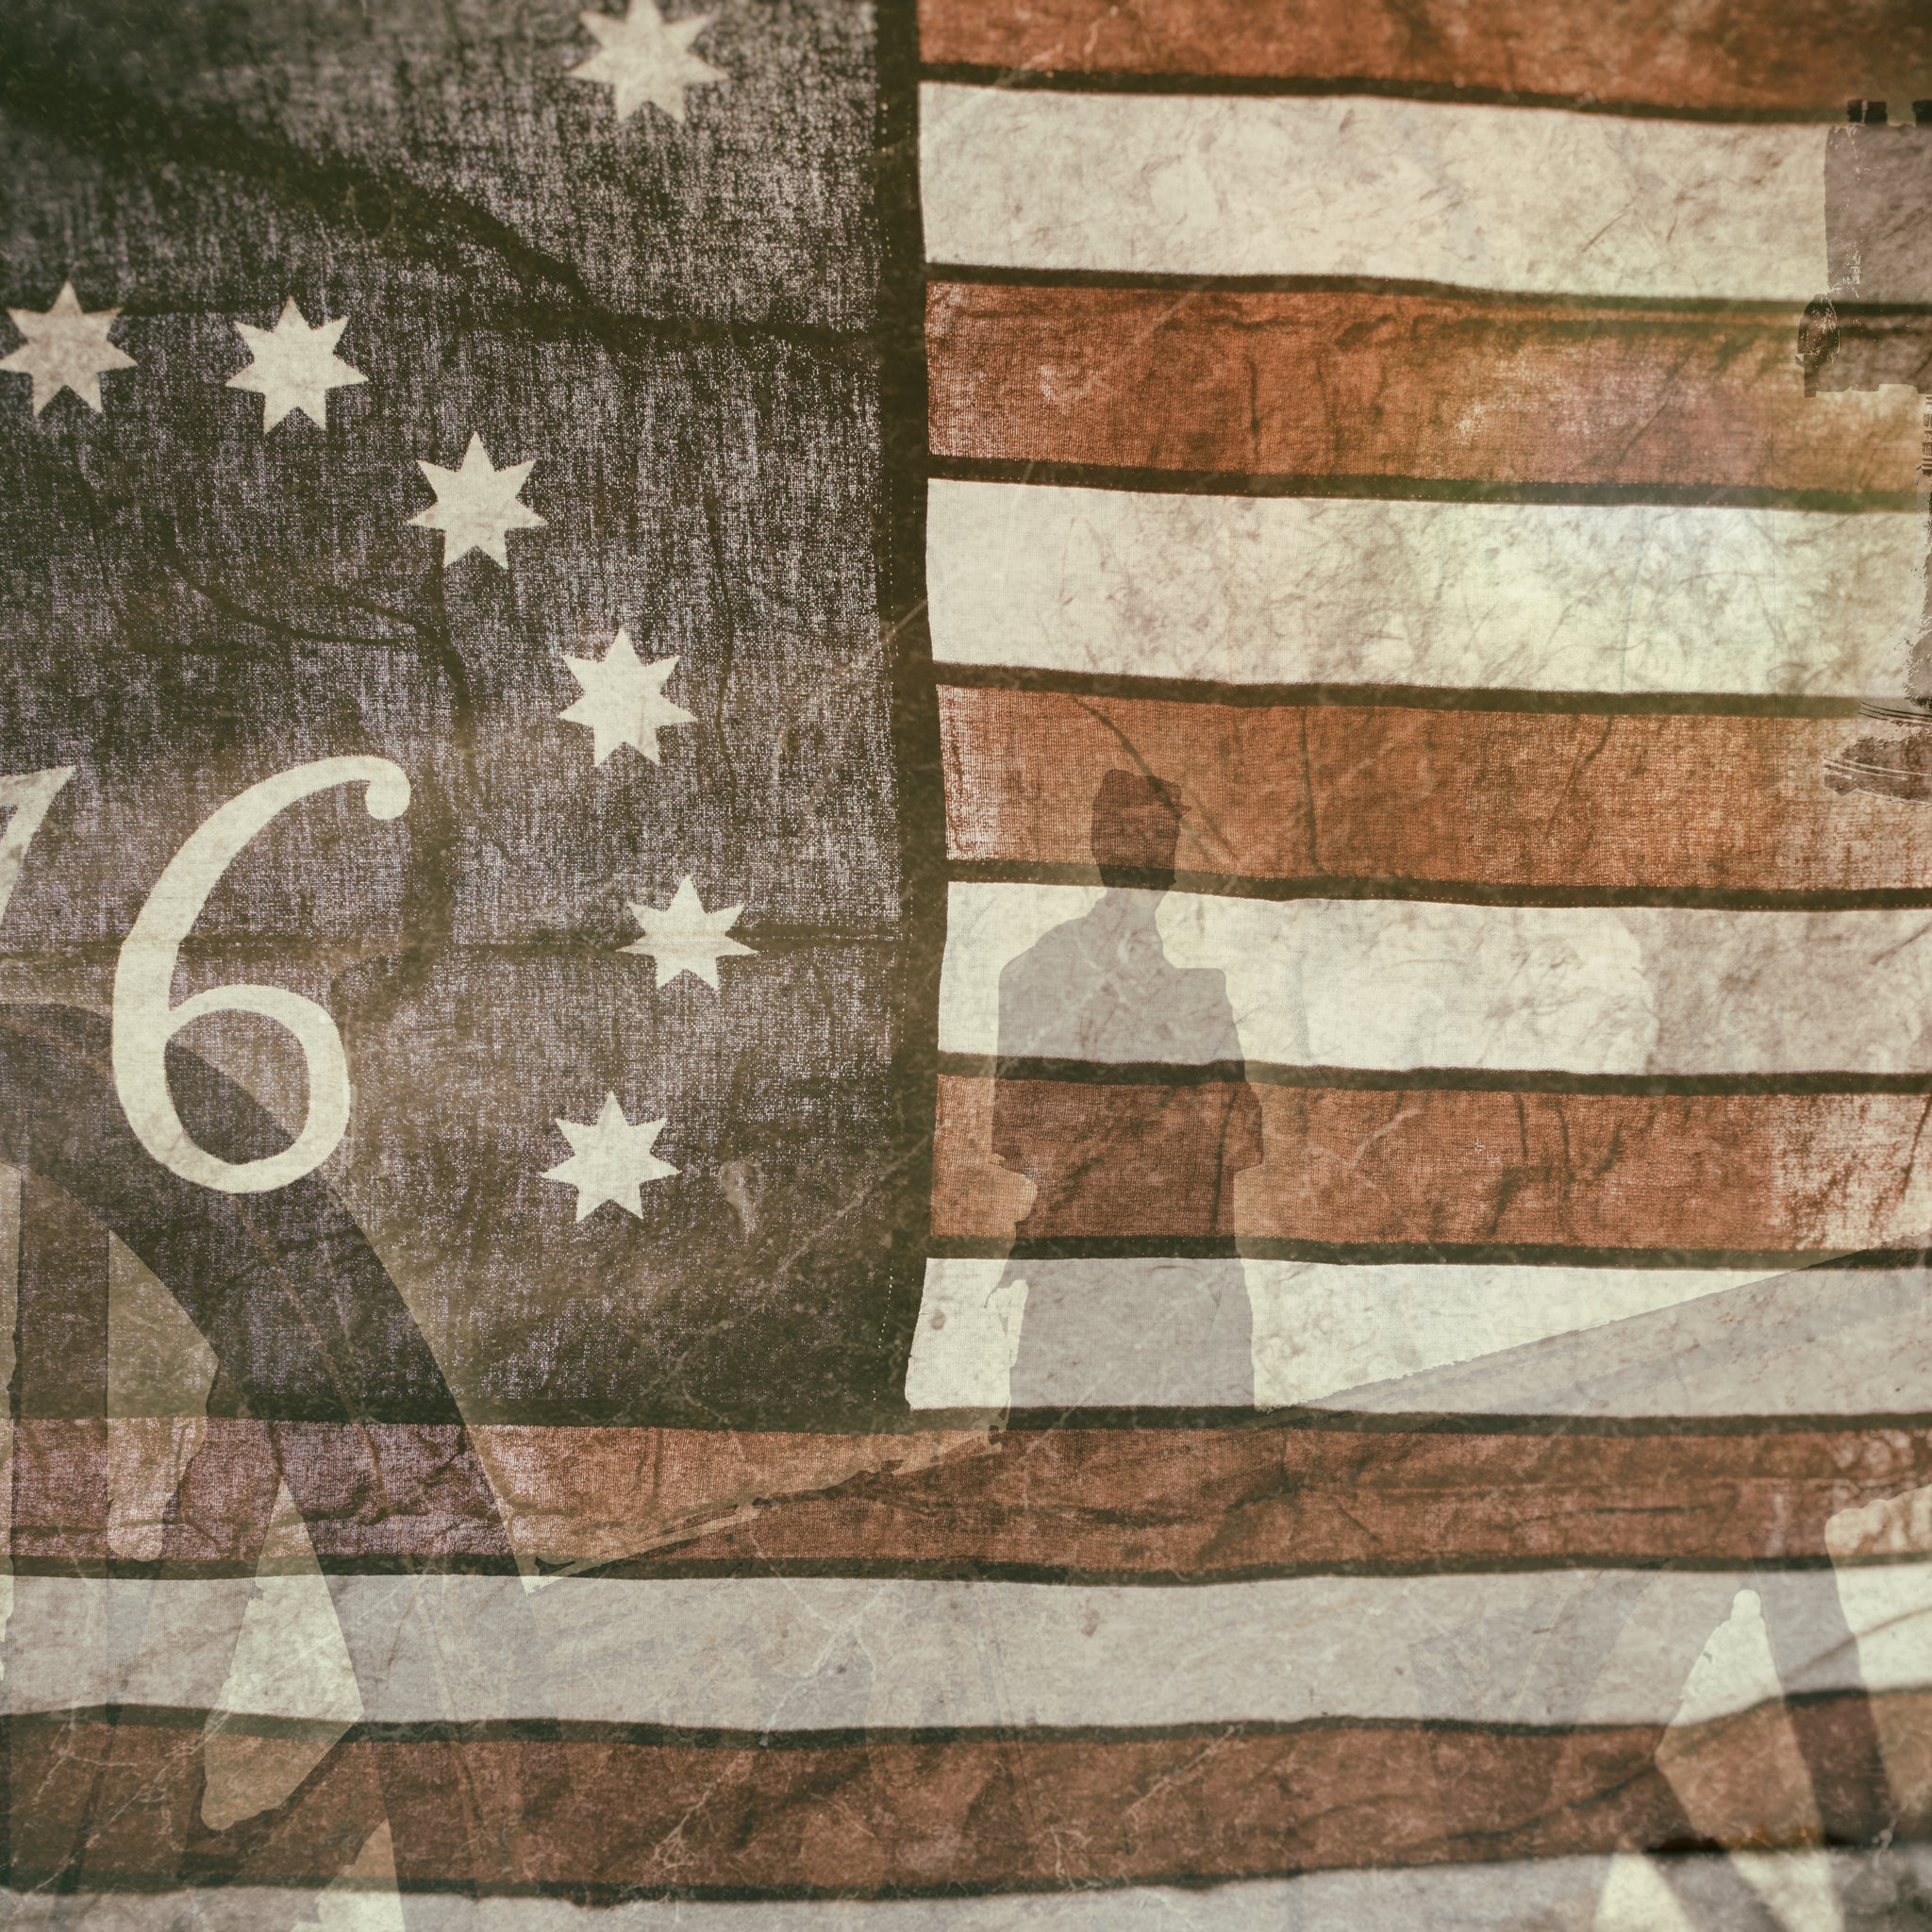 Everything You Need to Know About the Spirit of 1776 Flag